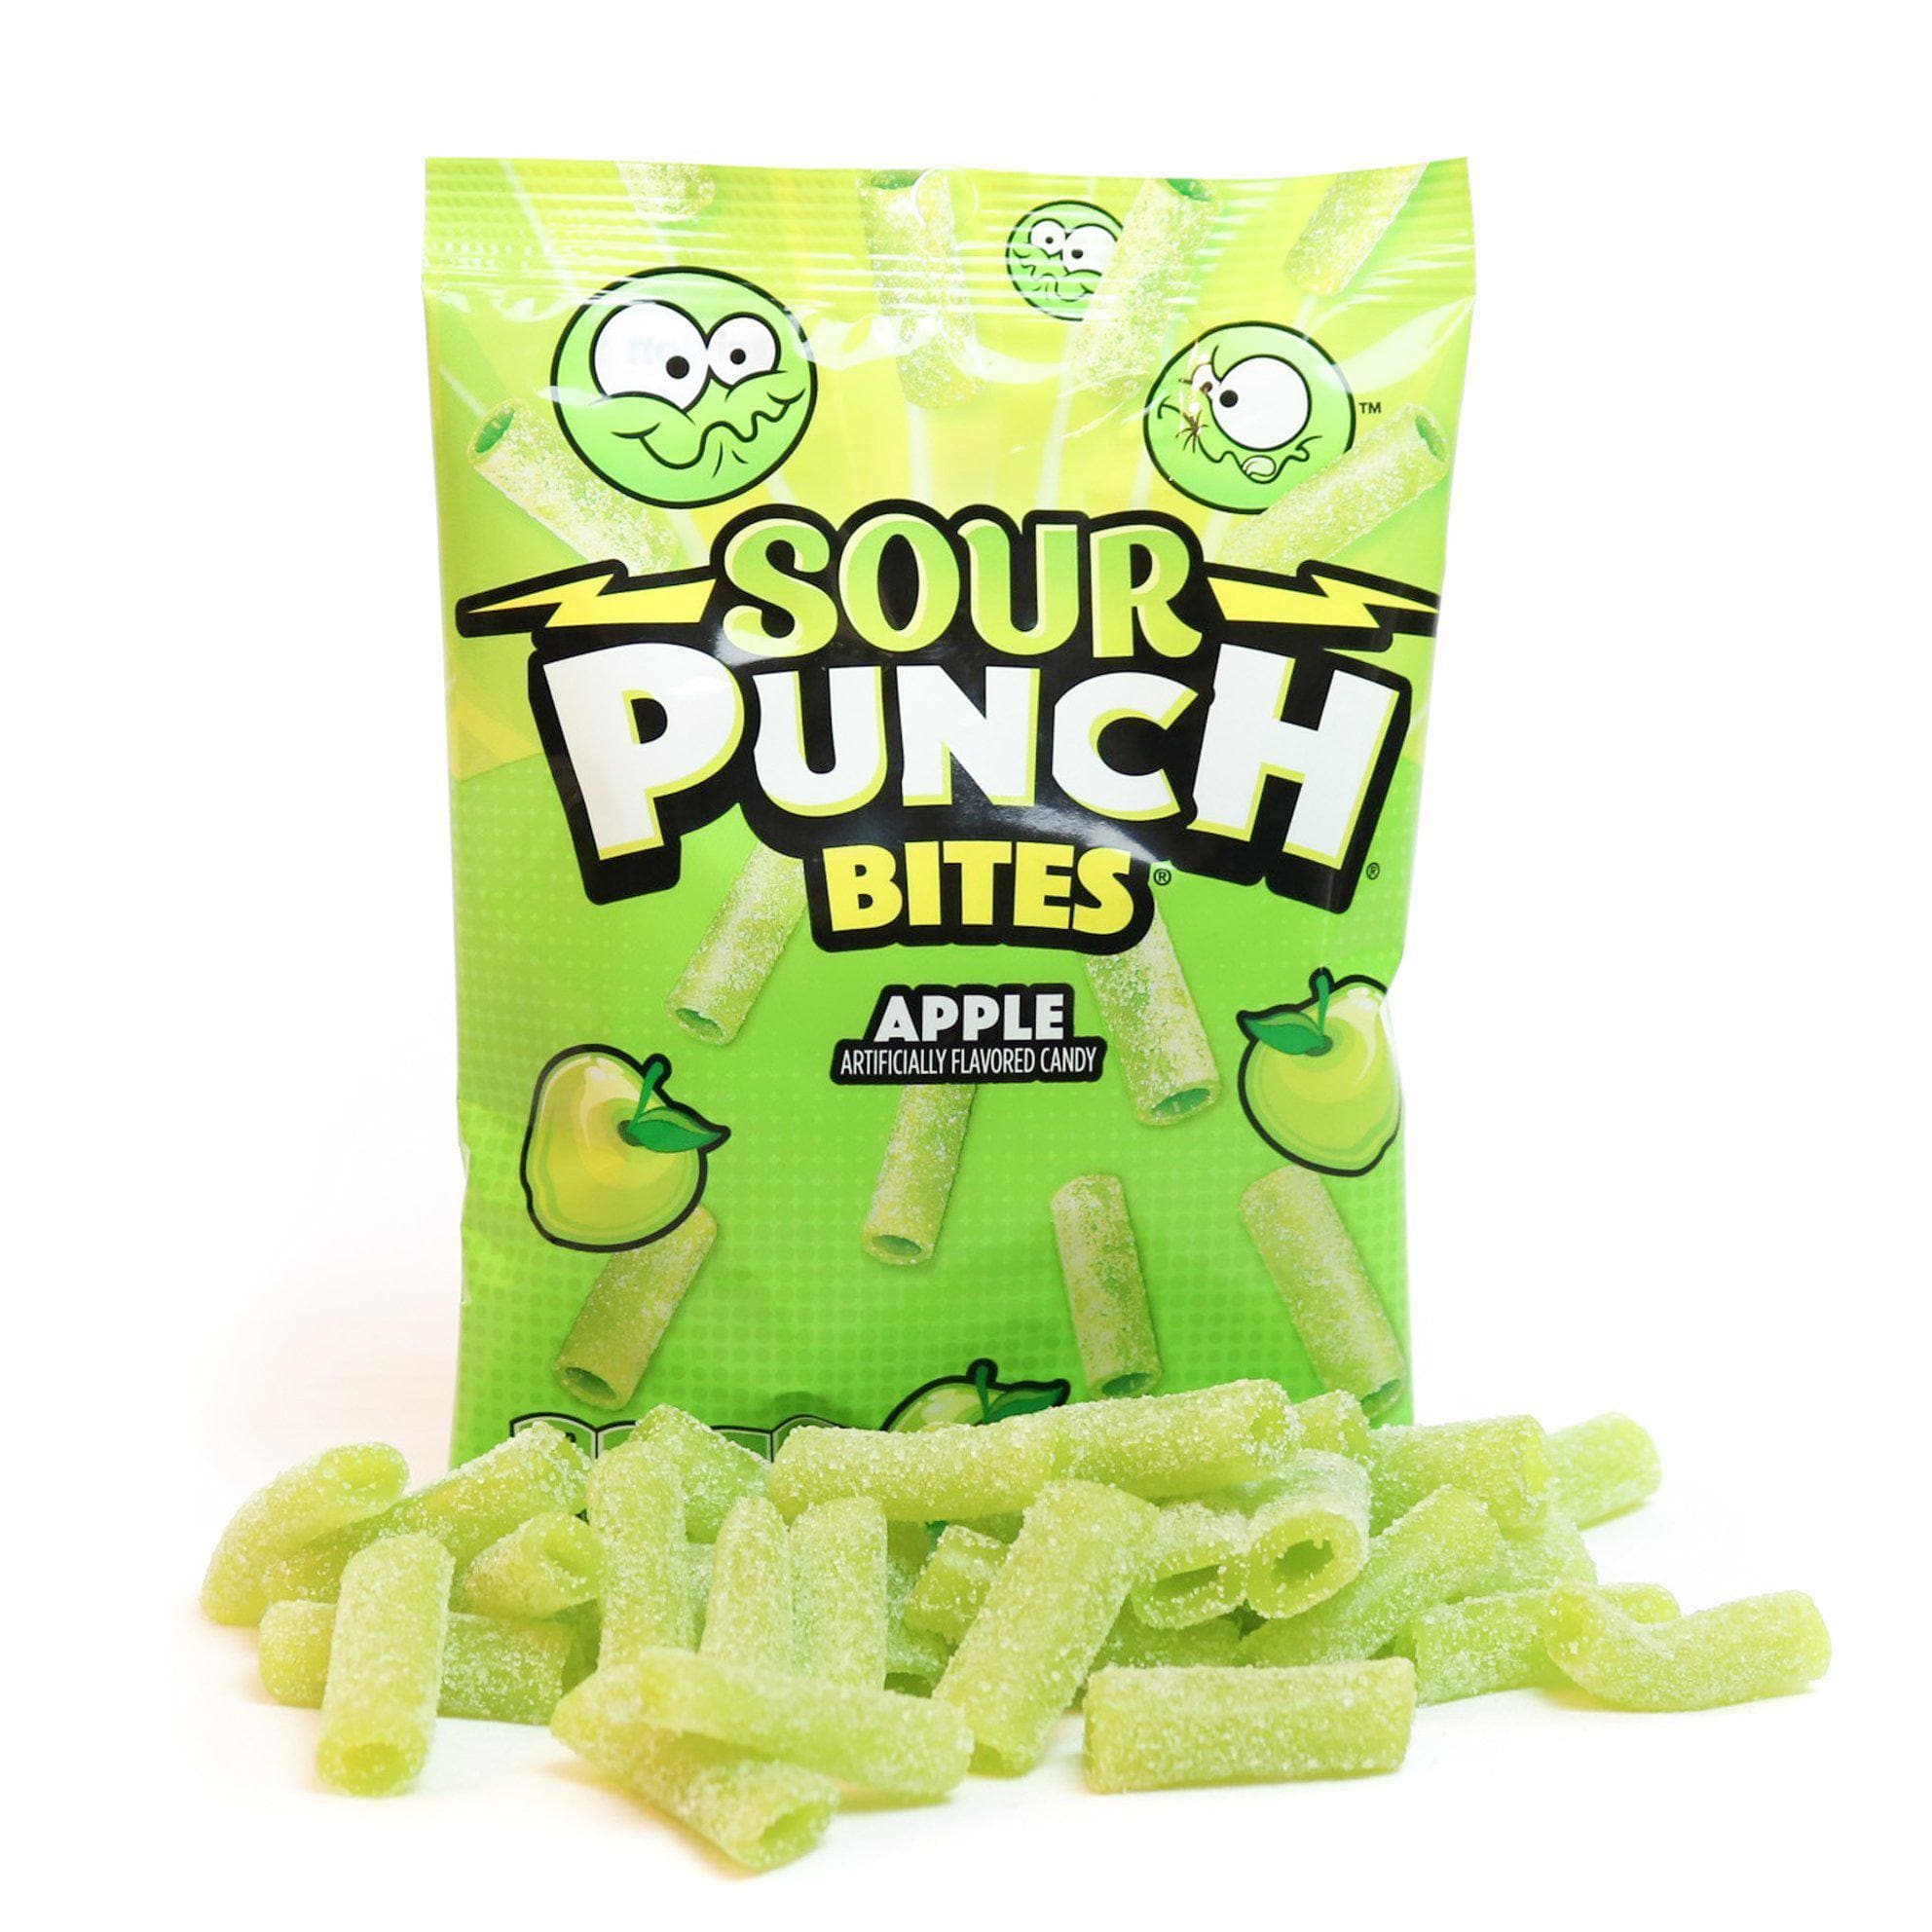 Sour Punch Bites Green Apple Candy in front of 5oz bag